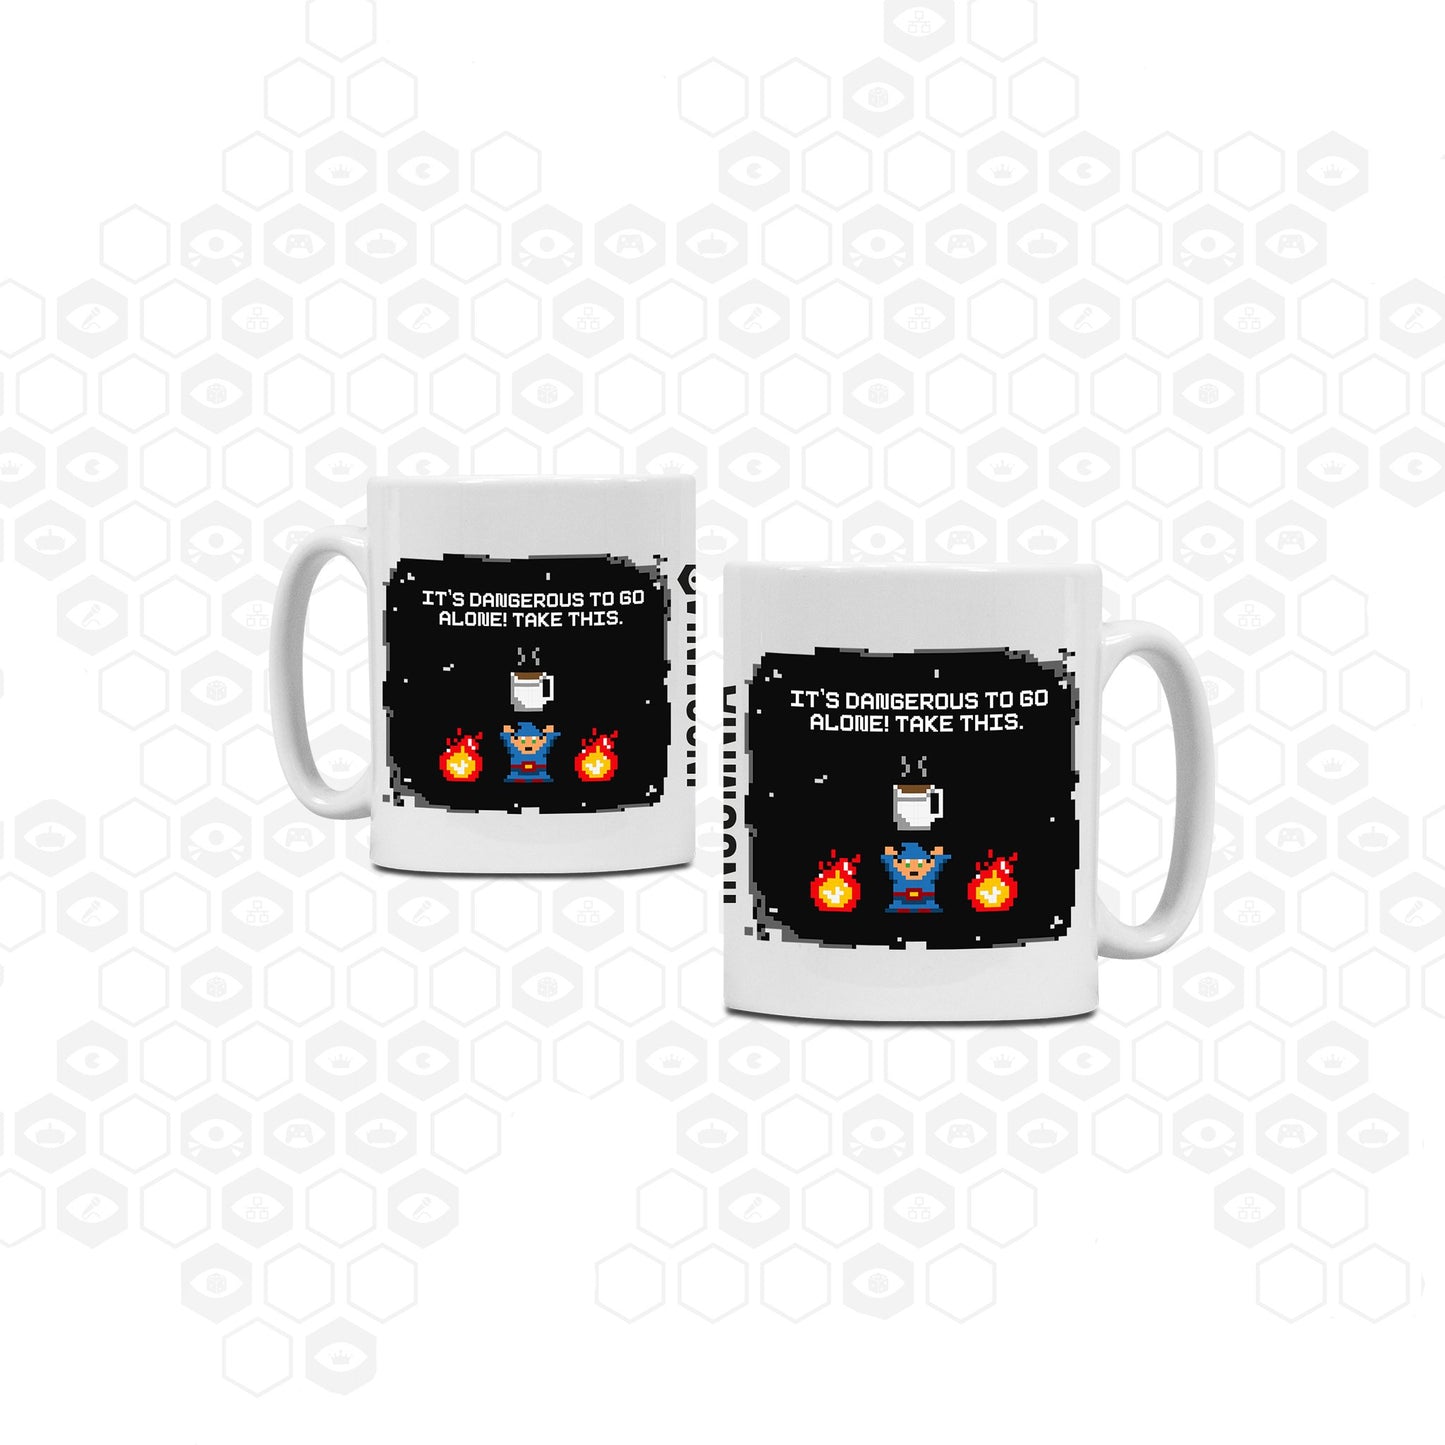 Insomnia white ceramic mug with Its dangerouse to go alone! Take this. design on both sides